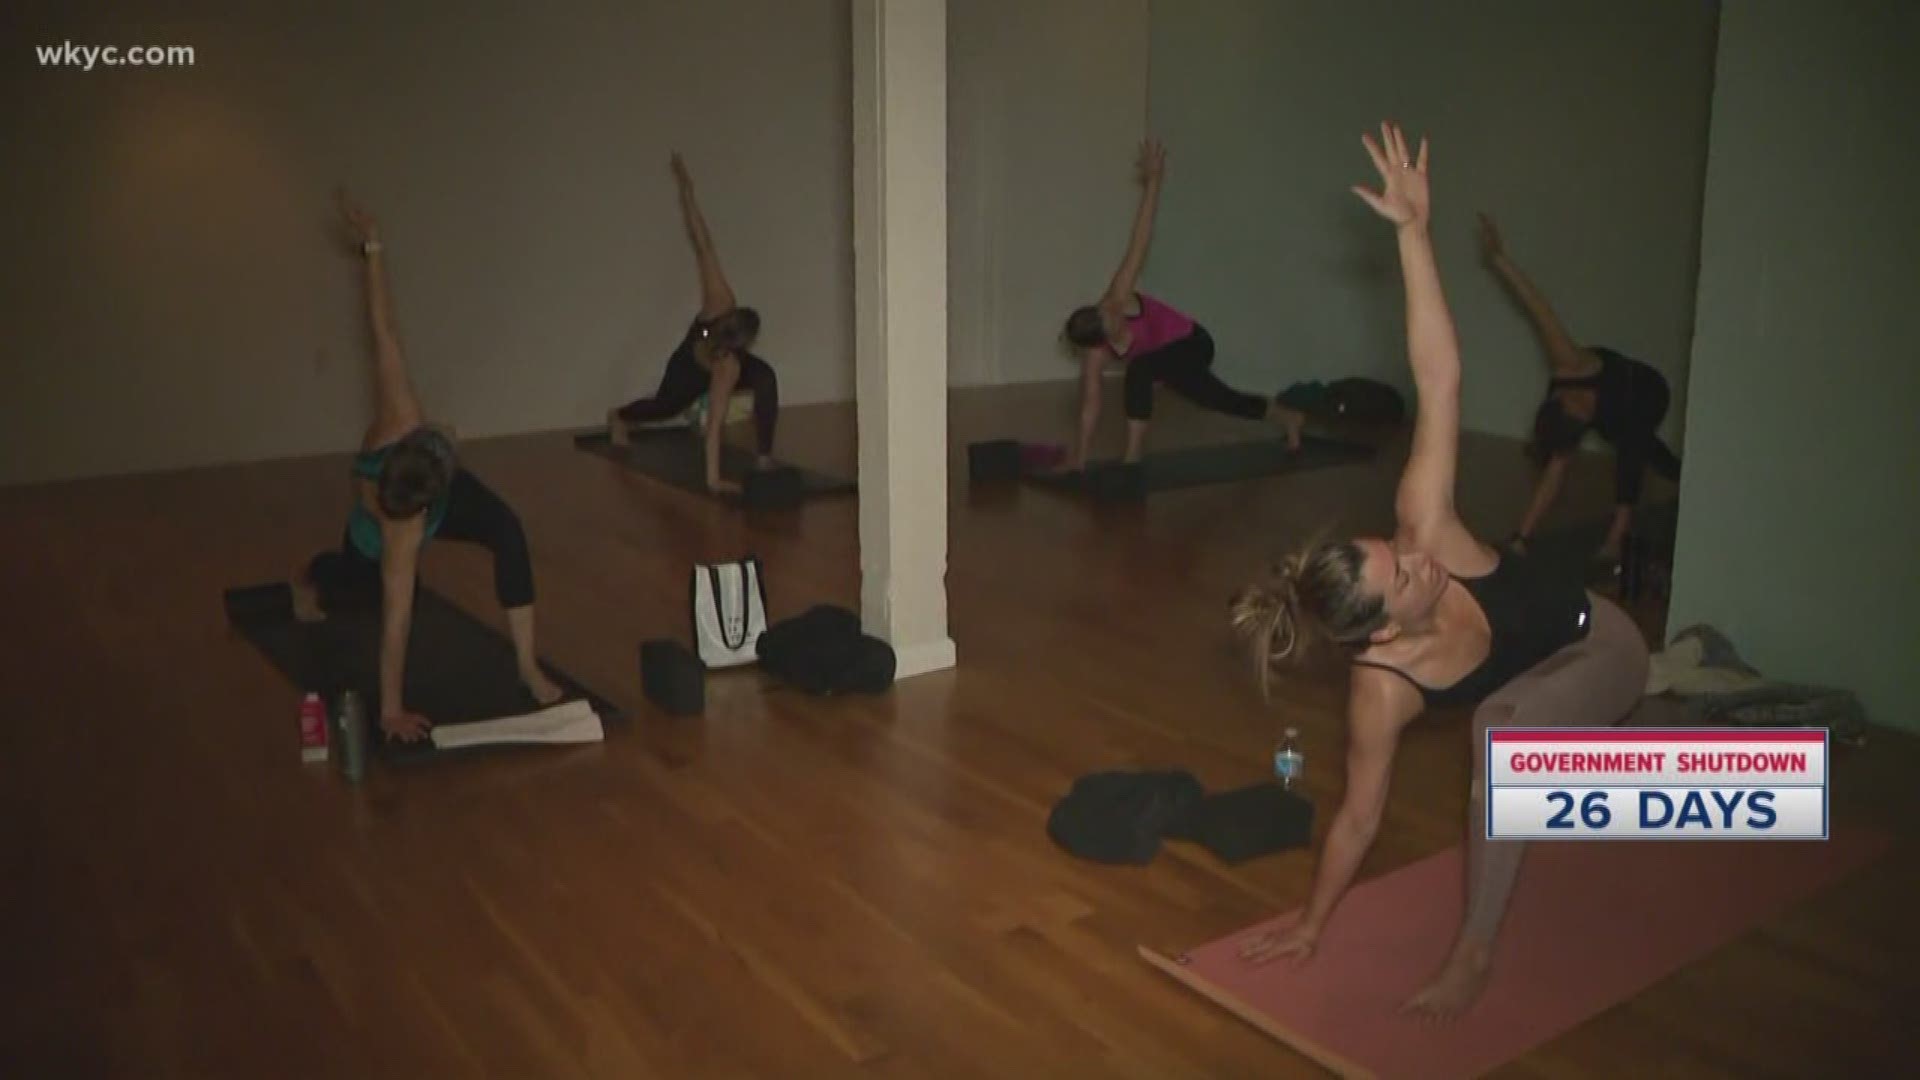 Jan. 16, 2019: The Inner Bliss Yoga Studio is joining in the efforts to make things easier for the government workers impacted by the shutdown.